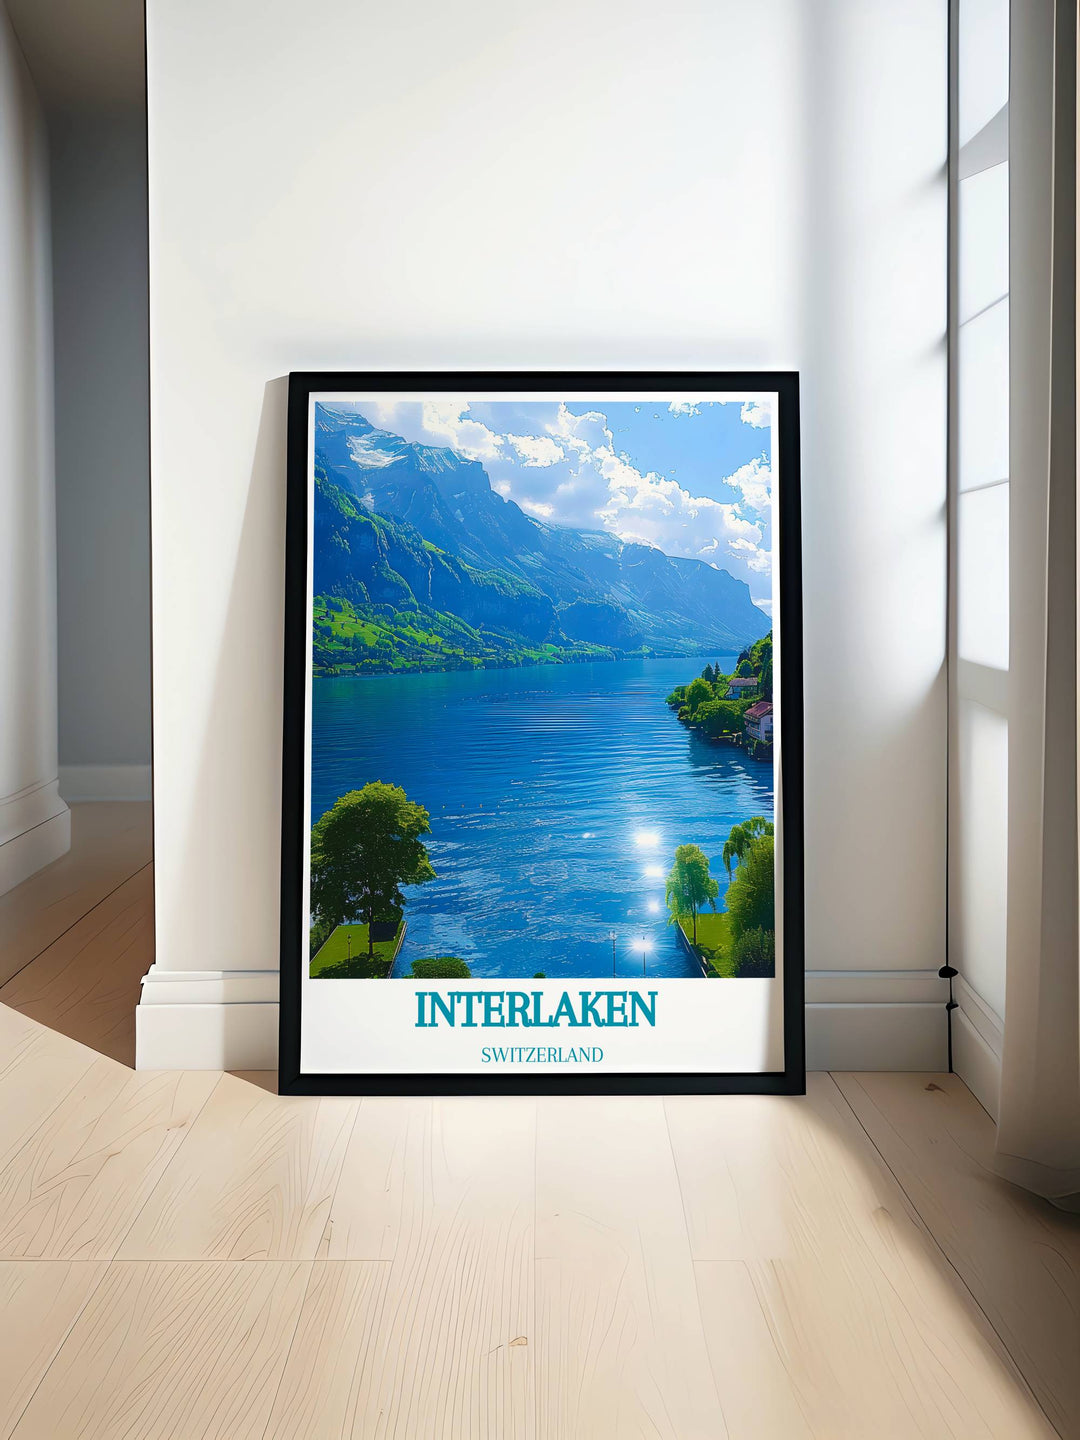 Framed art of Lake Thun showing vibrant sunset colors reflecting on calm waters surrounded by Swiss Alps ideal for home decor